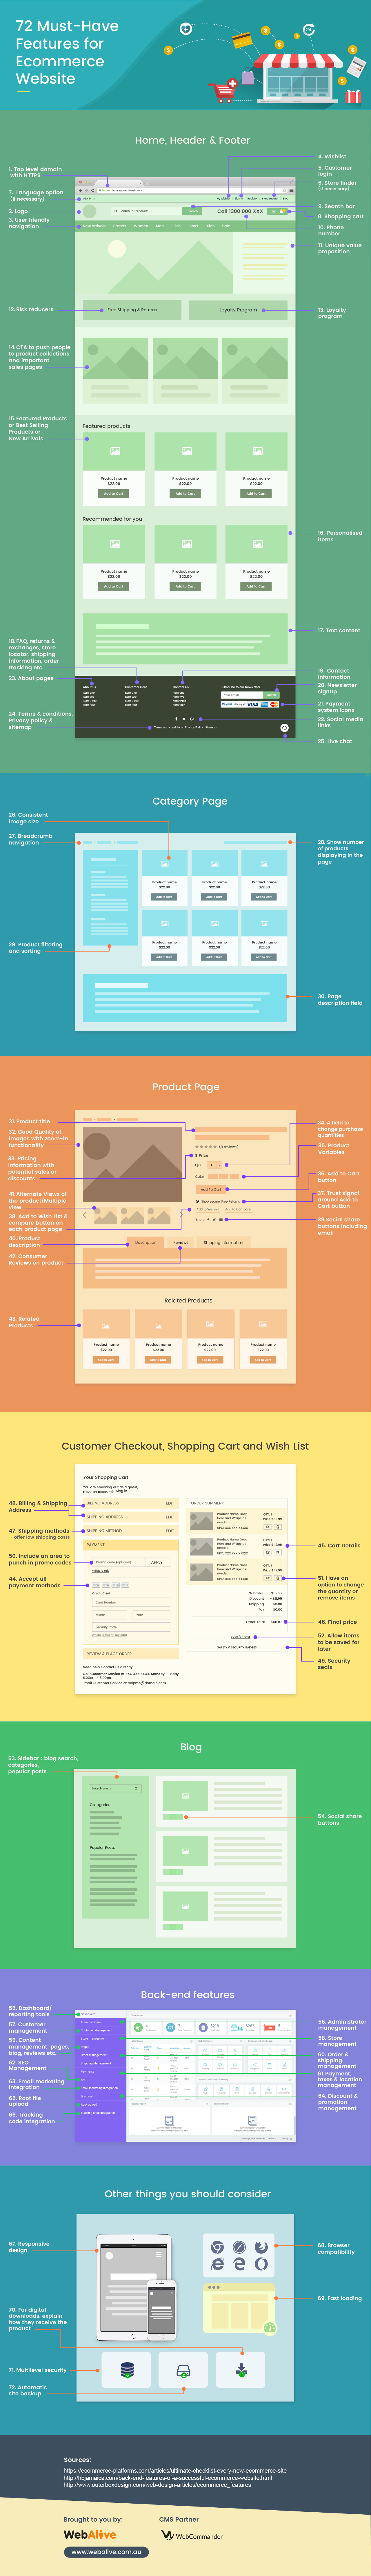 ecommerce website features infographic